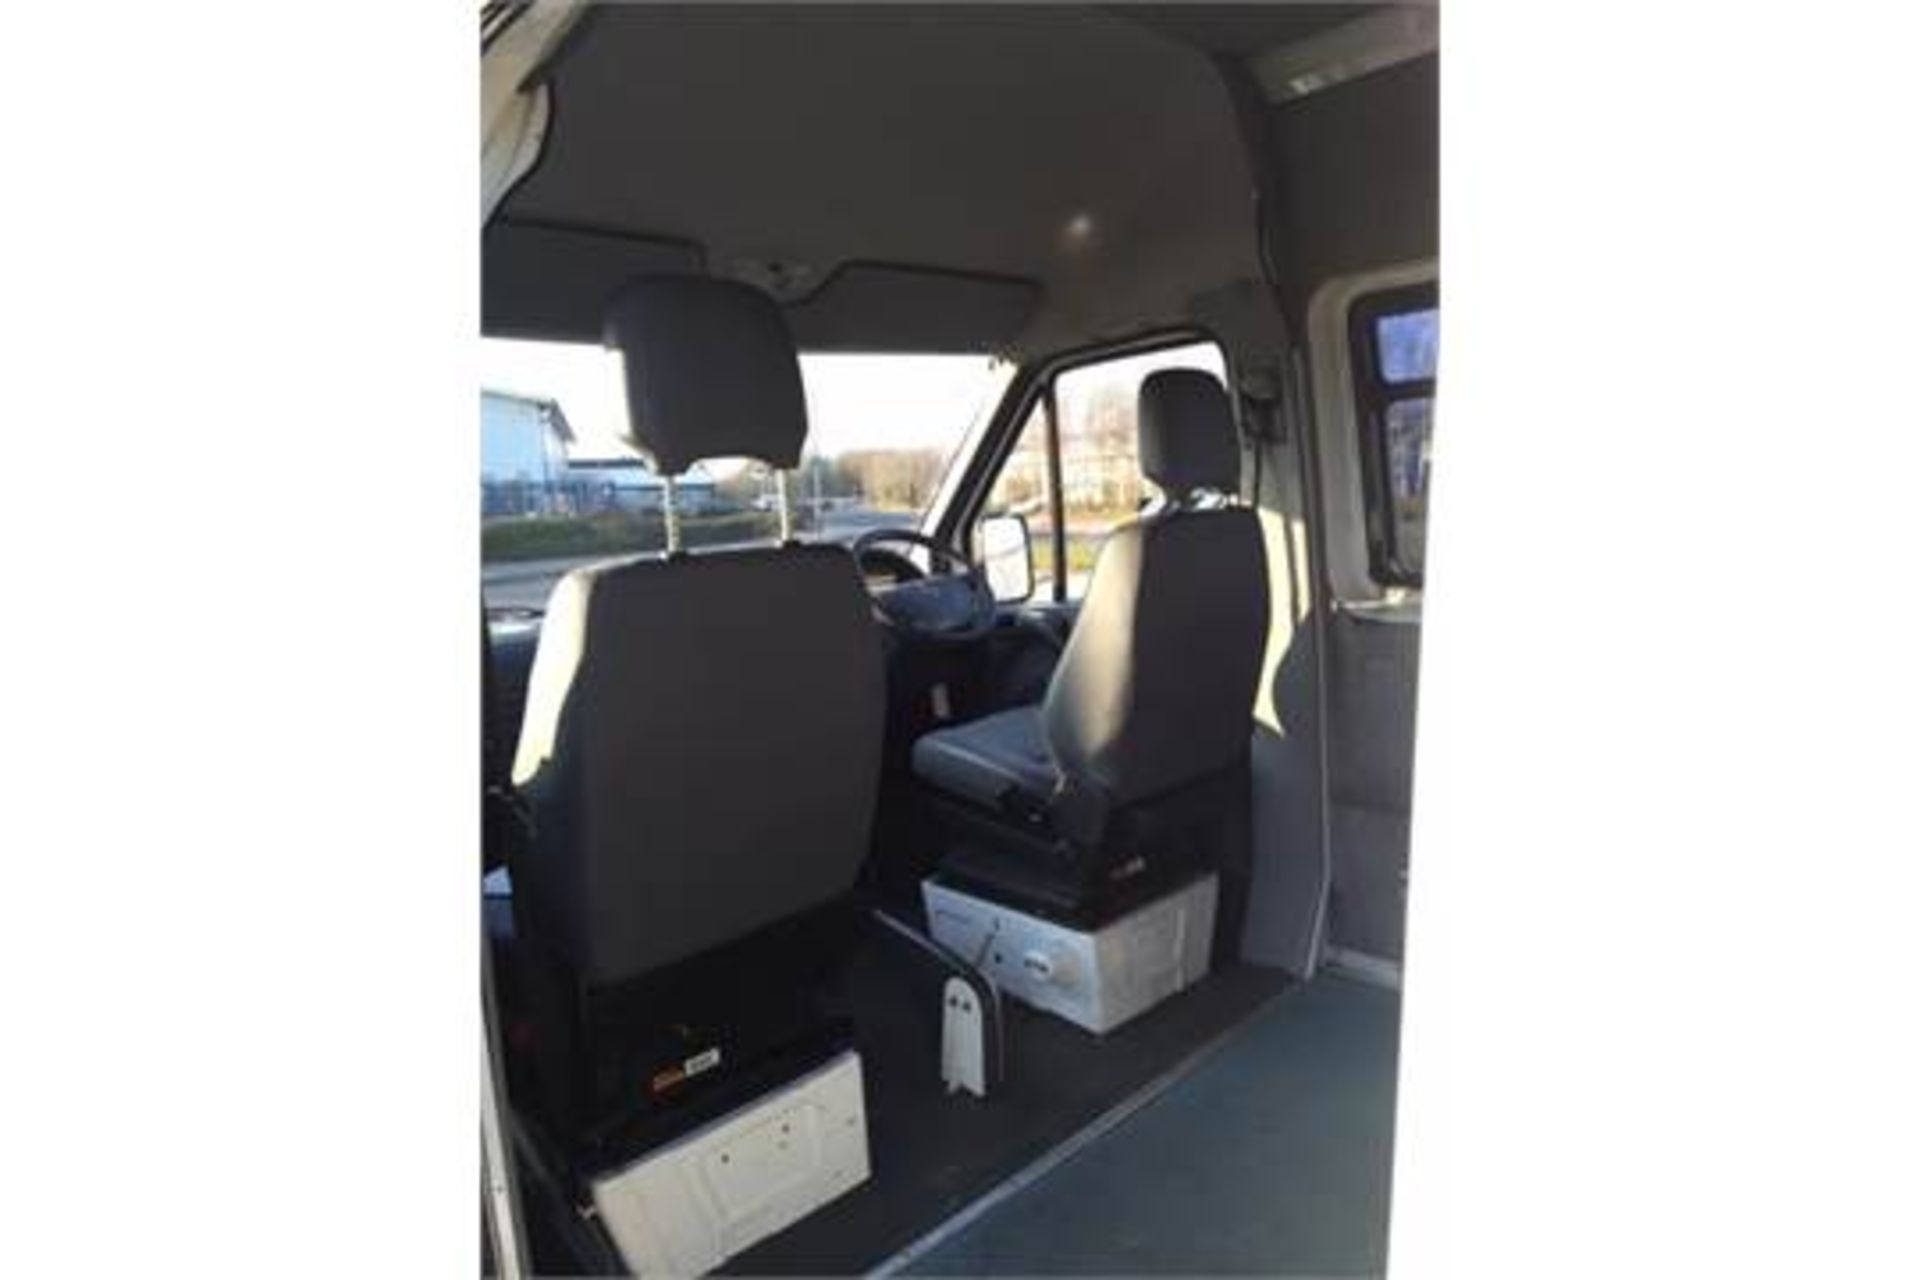 2005 Mercedes Sprinter 311 cdi 2148cc Diesel Van with side windows Owned and used by the police from - Image 11 of 23